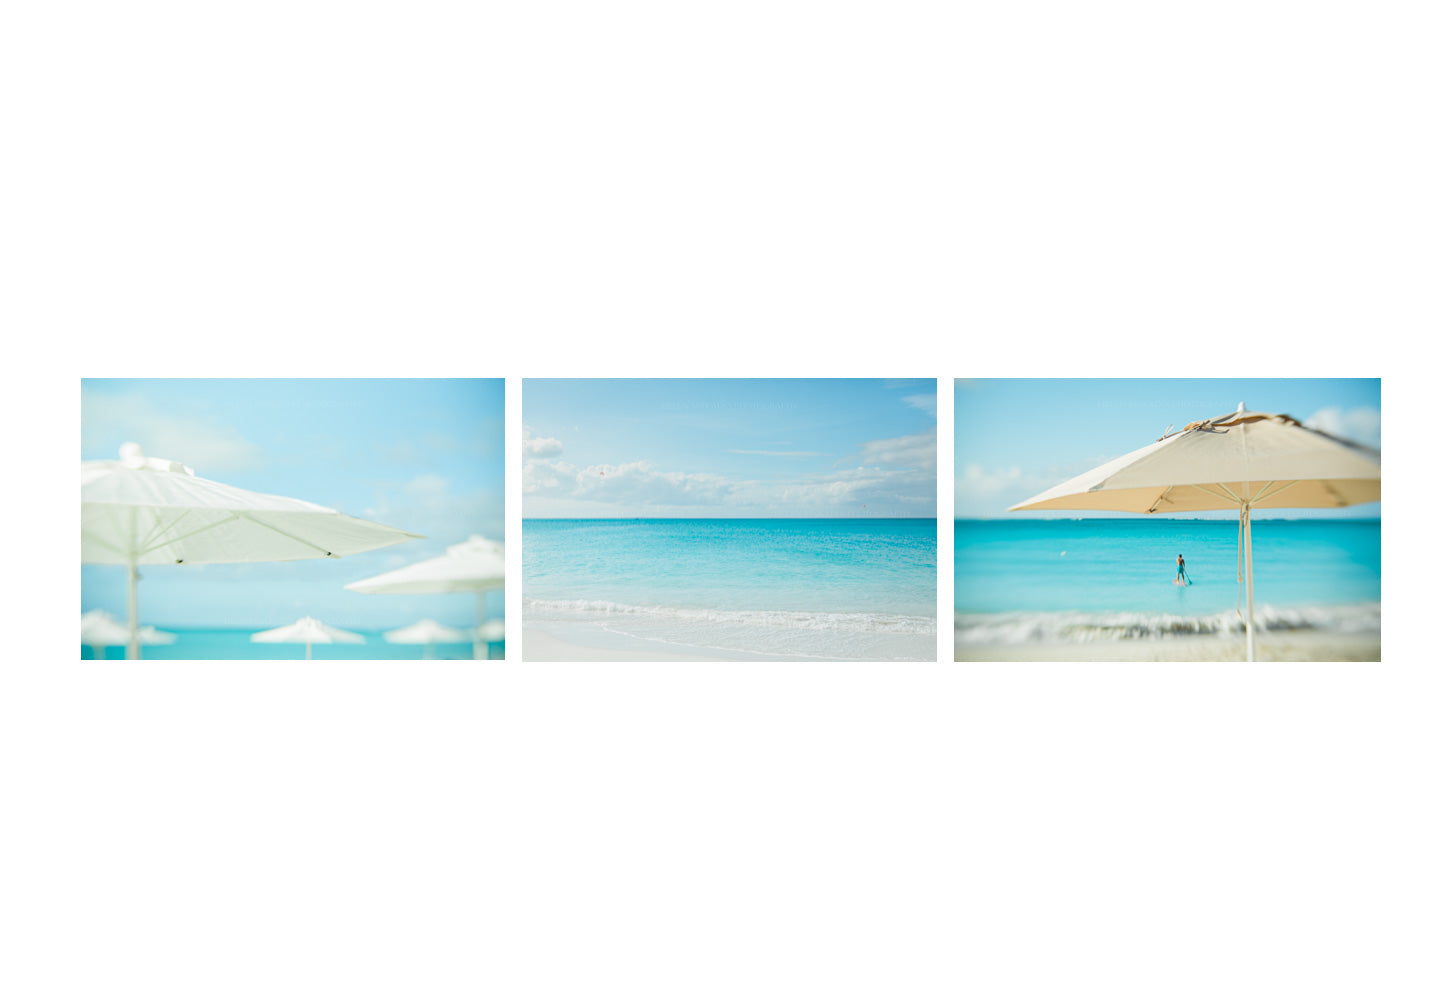 Set of 3 Photographs of the blue waters of Turks and Caicos